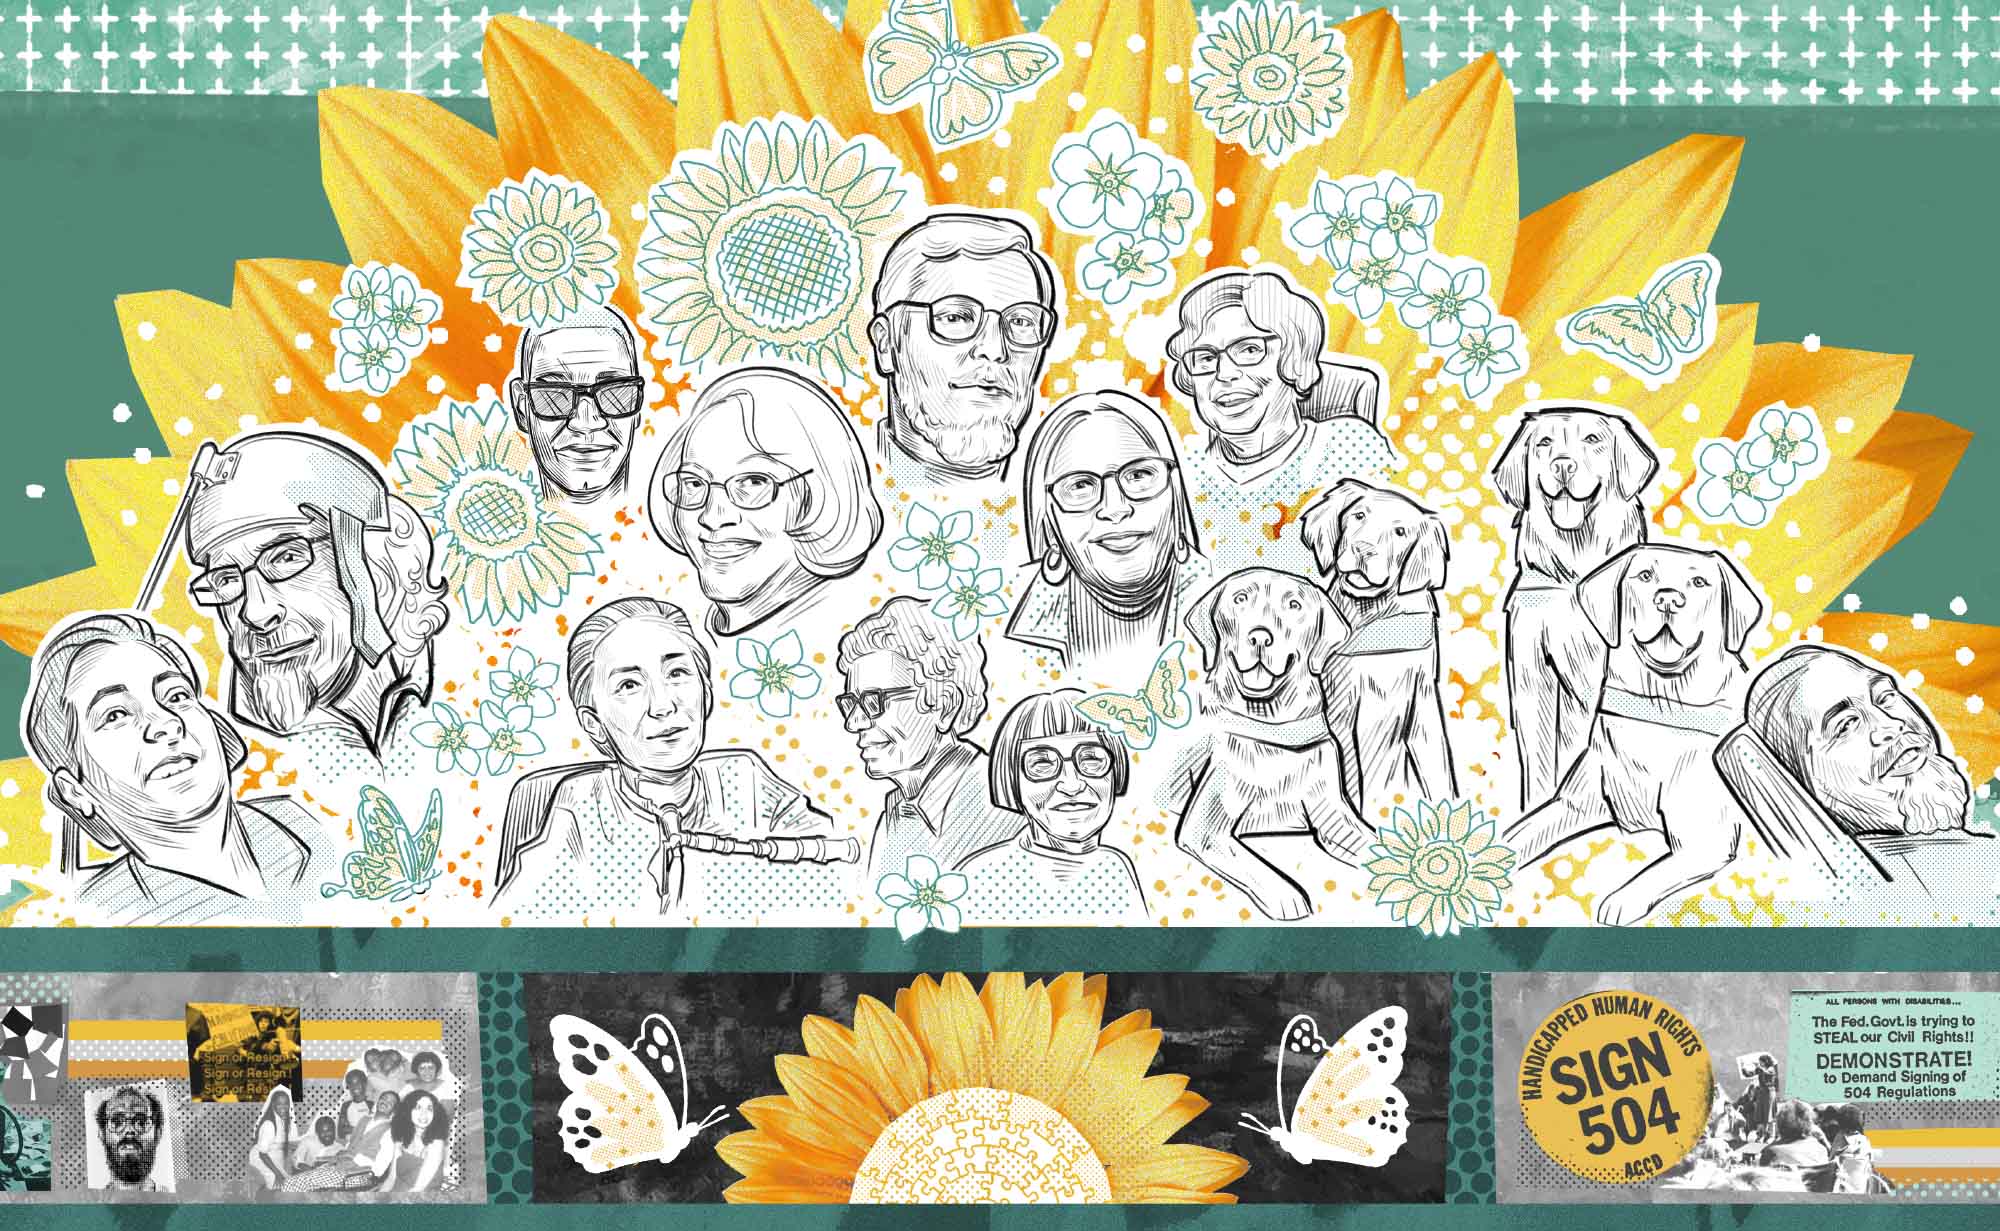 digital mural depicting portraits of notable persons with disabilities